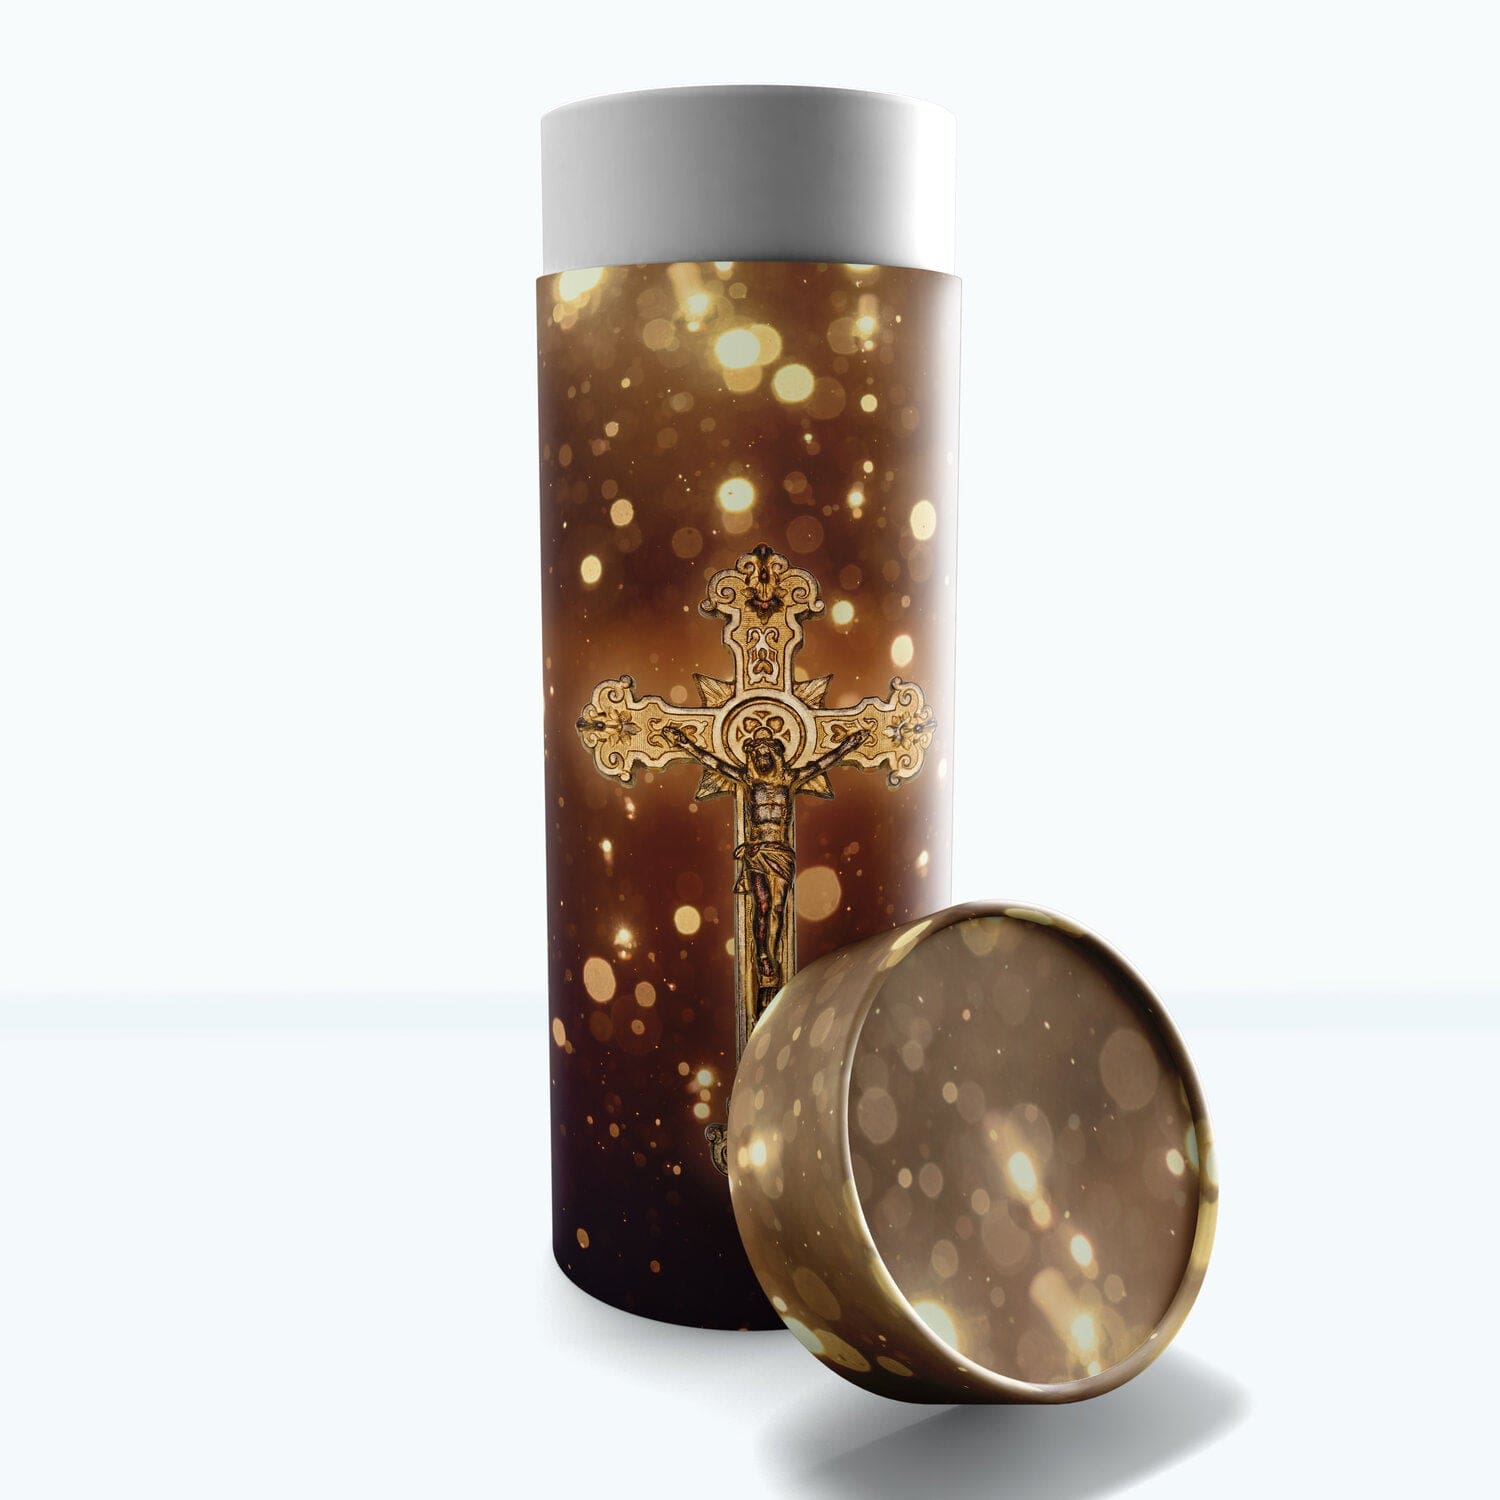 Commemorative Cremation Urns Medium Our Lord and Savior (Gold) - Biodegradable & Eco Friendly Burial or Scattering Urn / Tube